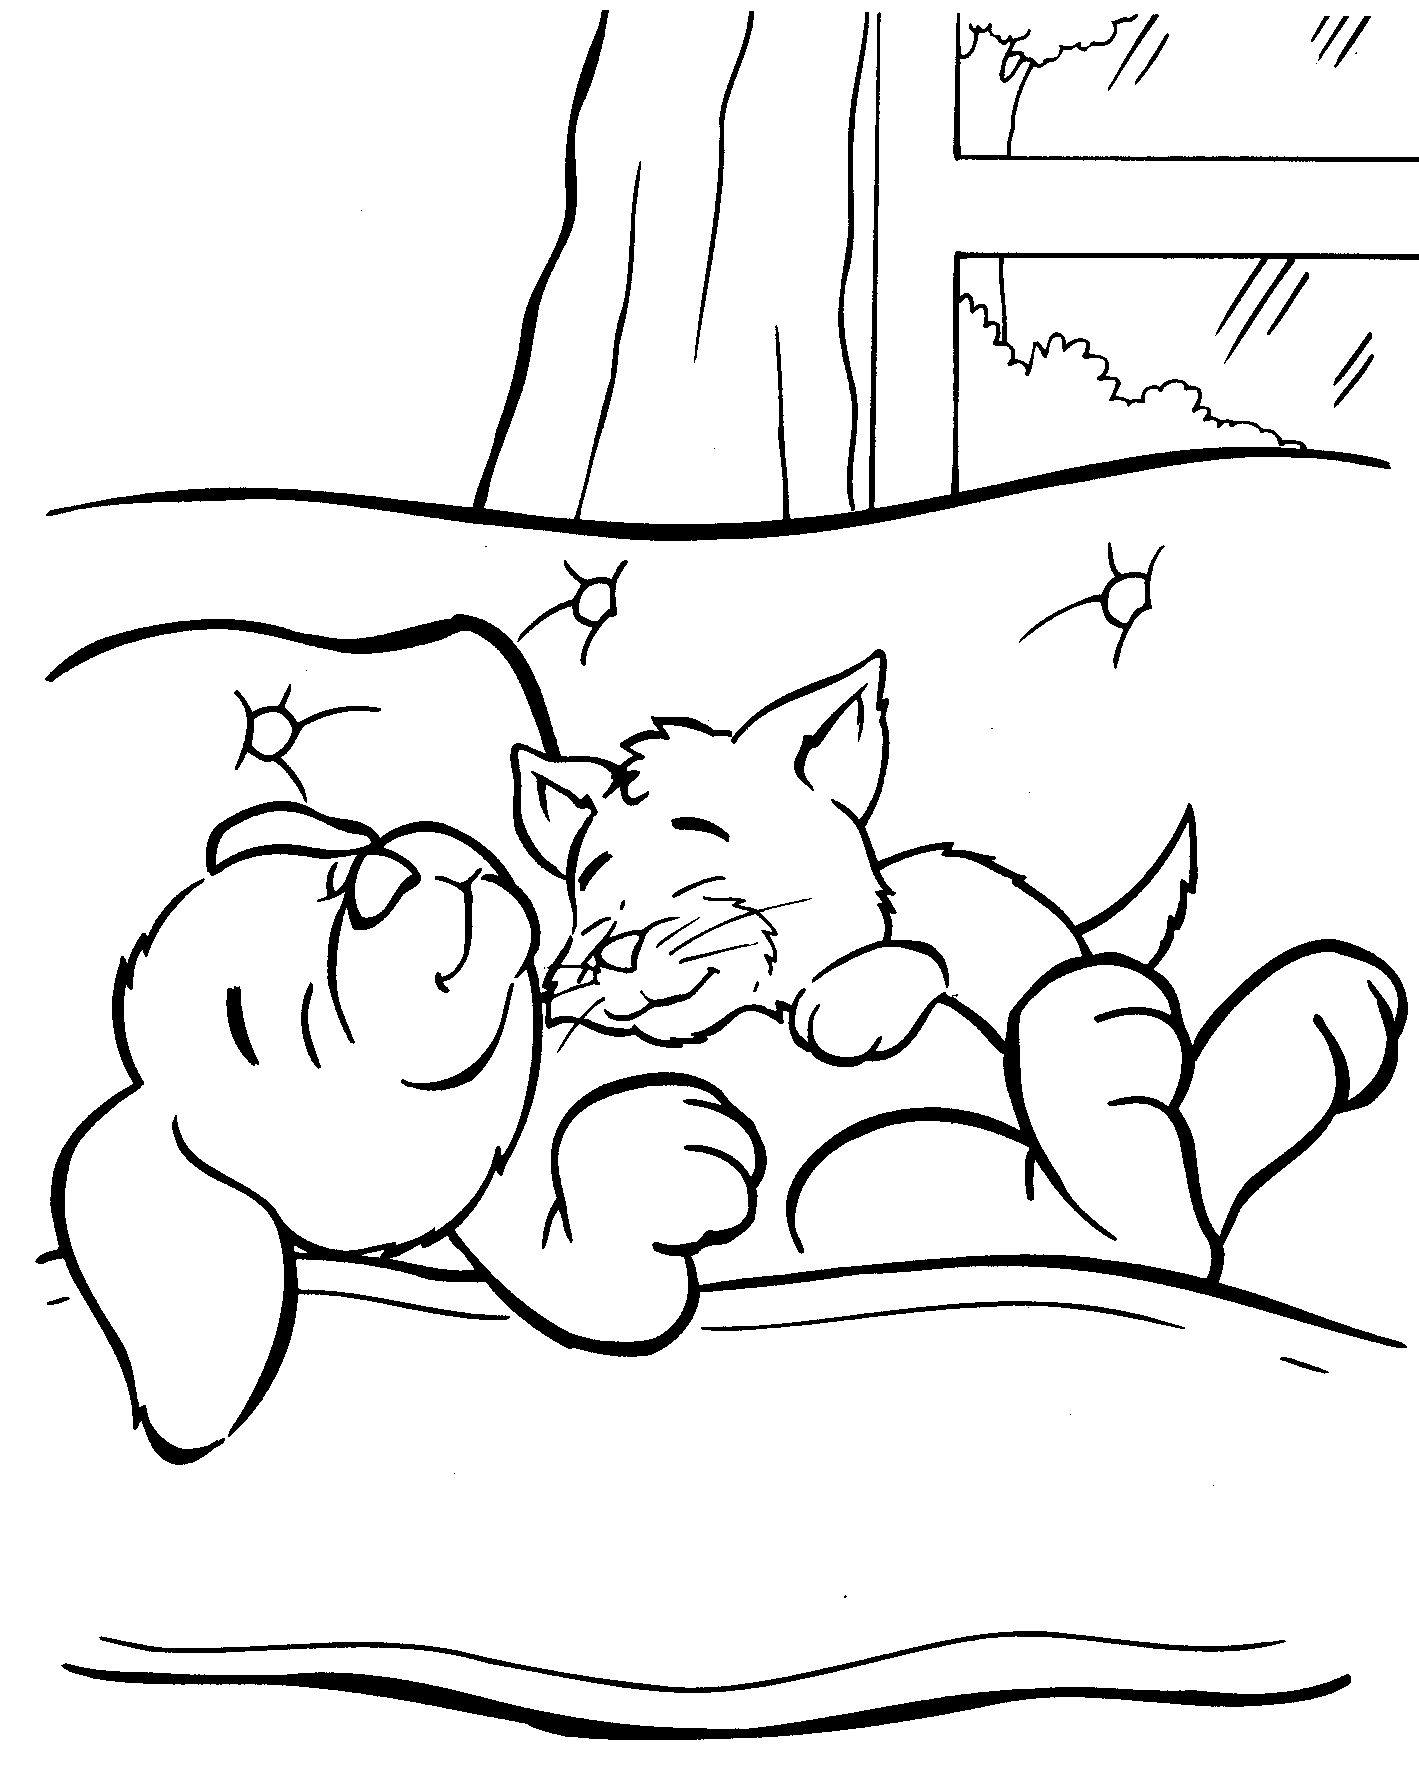 Puppy and Kitten Friends Coloring Page